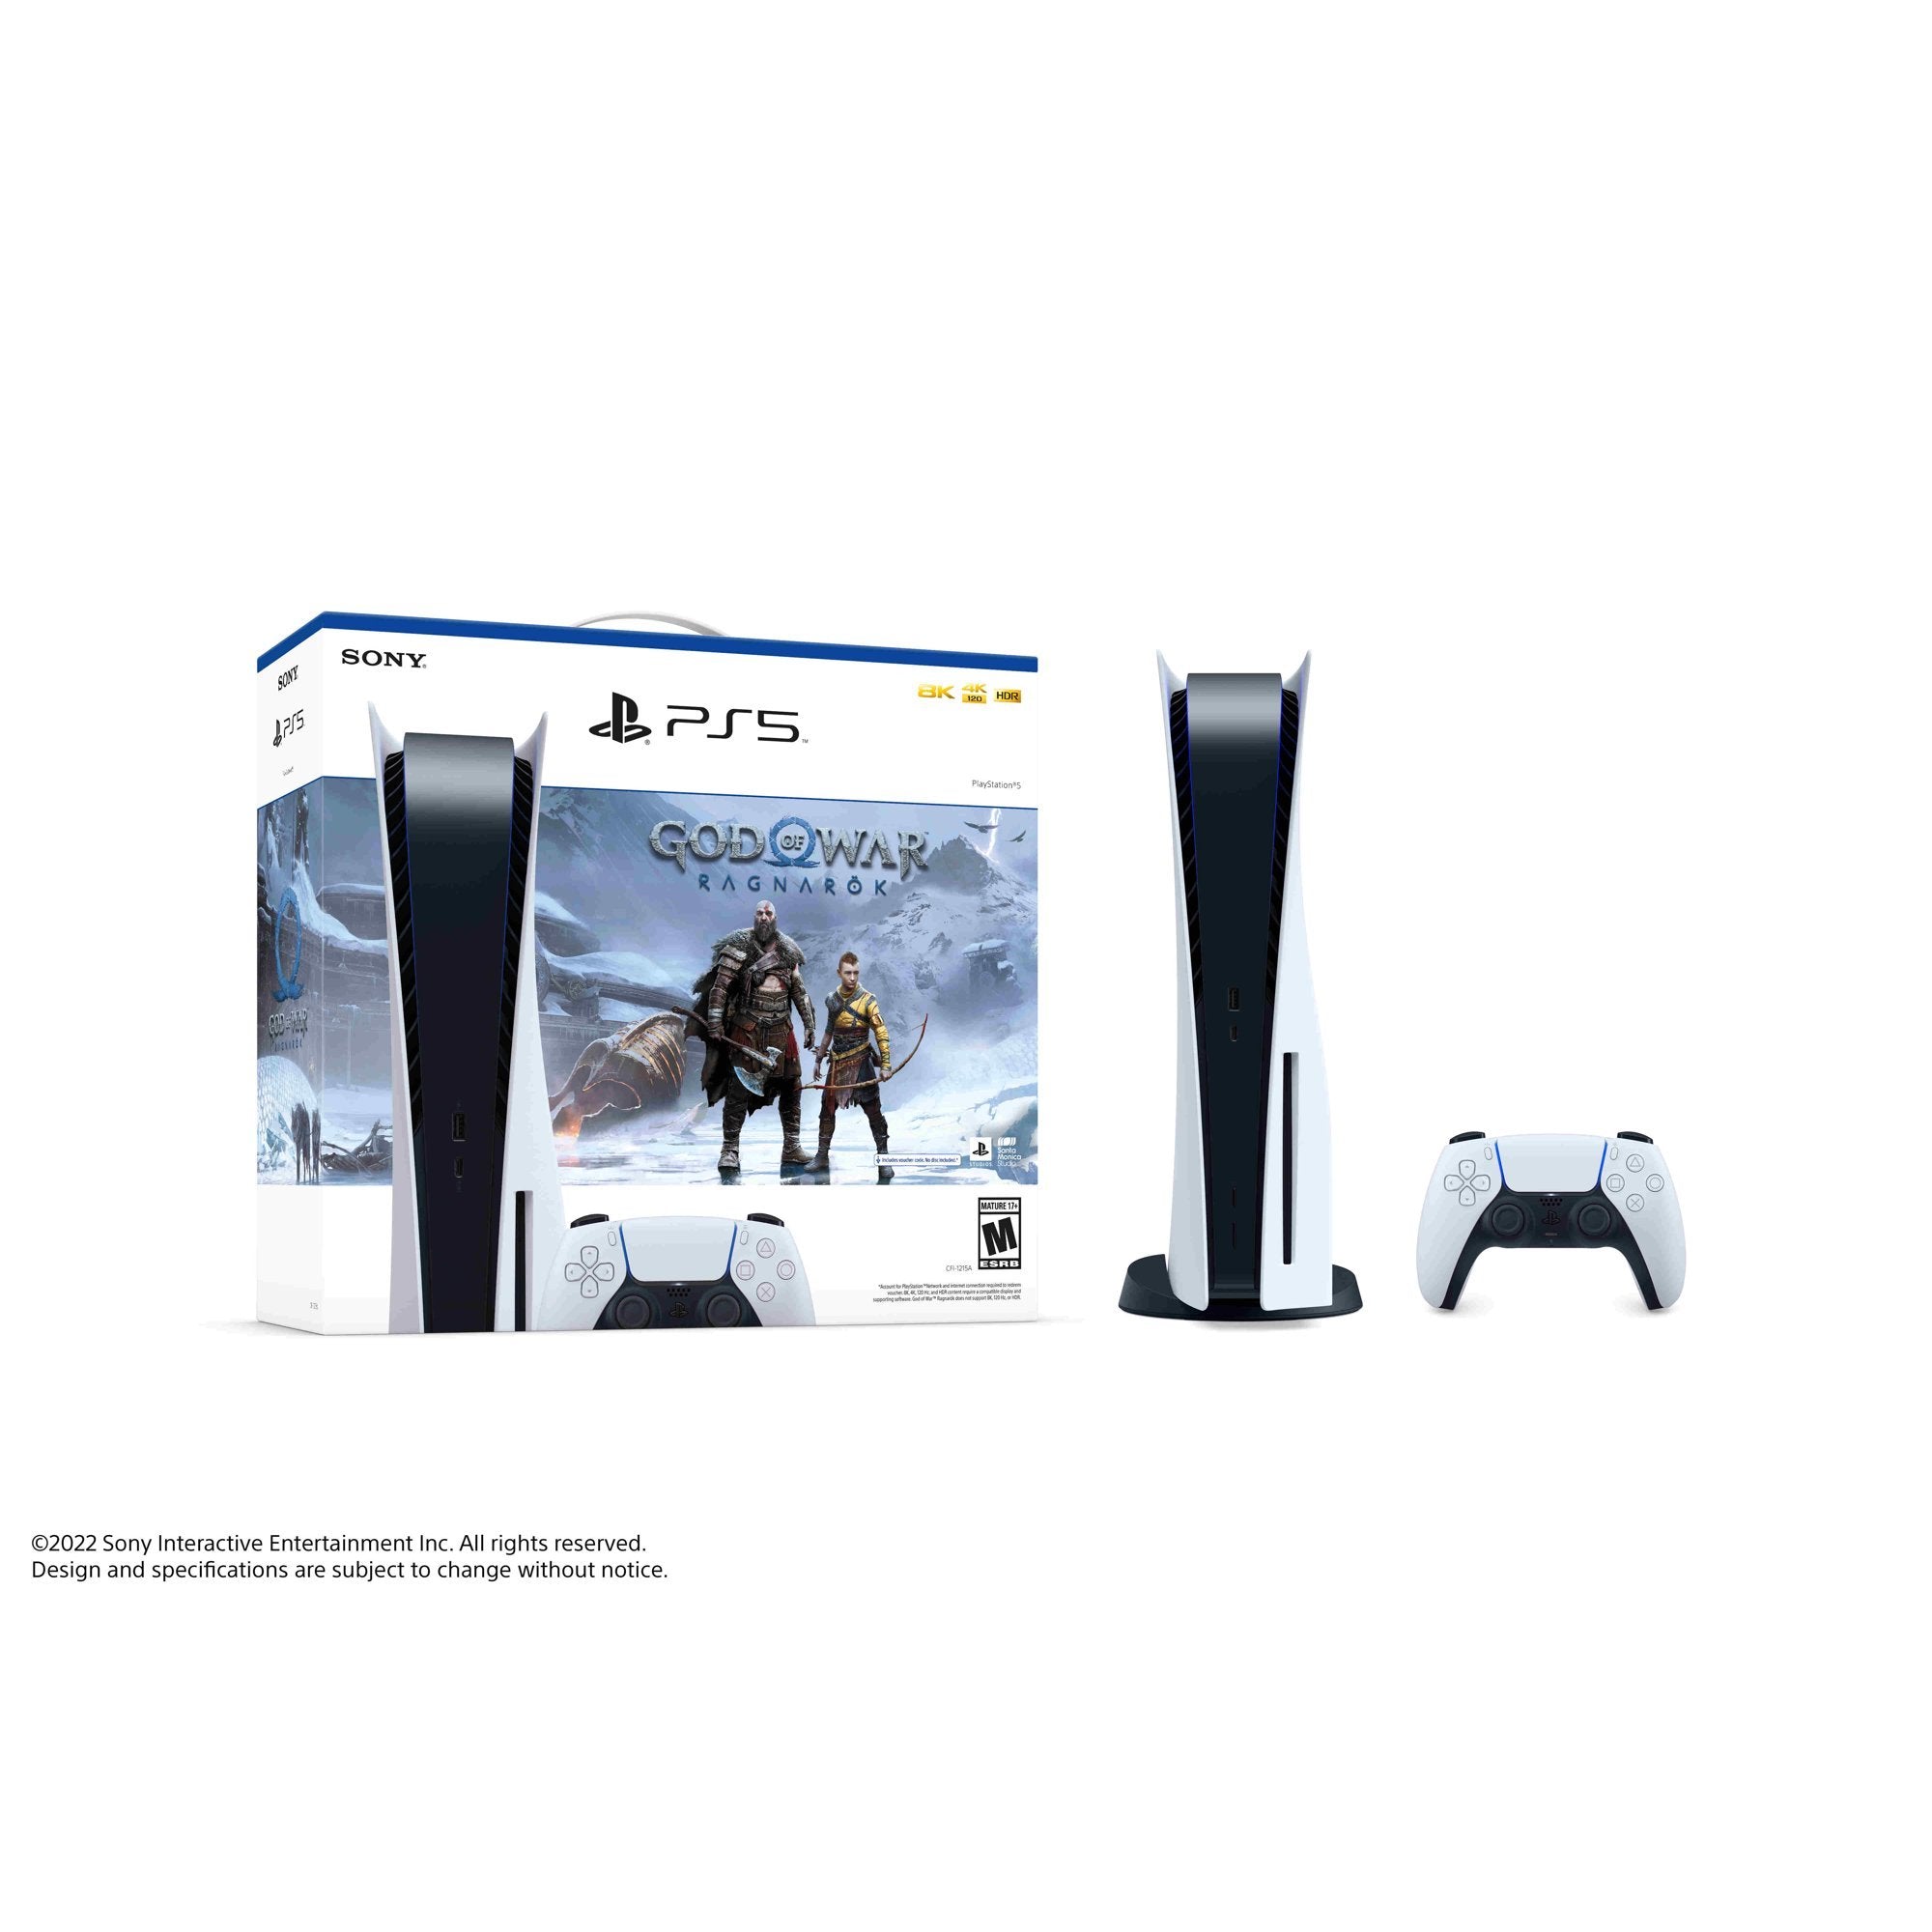 PlayStation 5 Disc Edition God of War Ragnarok Bundle with Cyberpunk 2077 and Mytrix Controller Charger